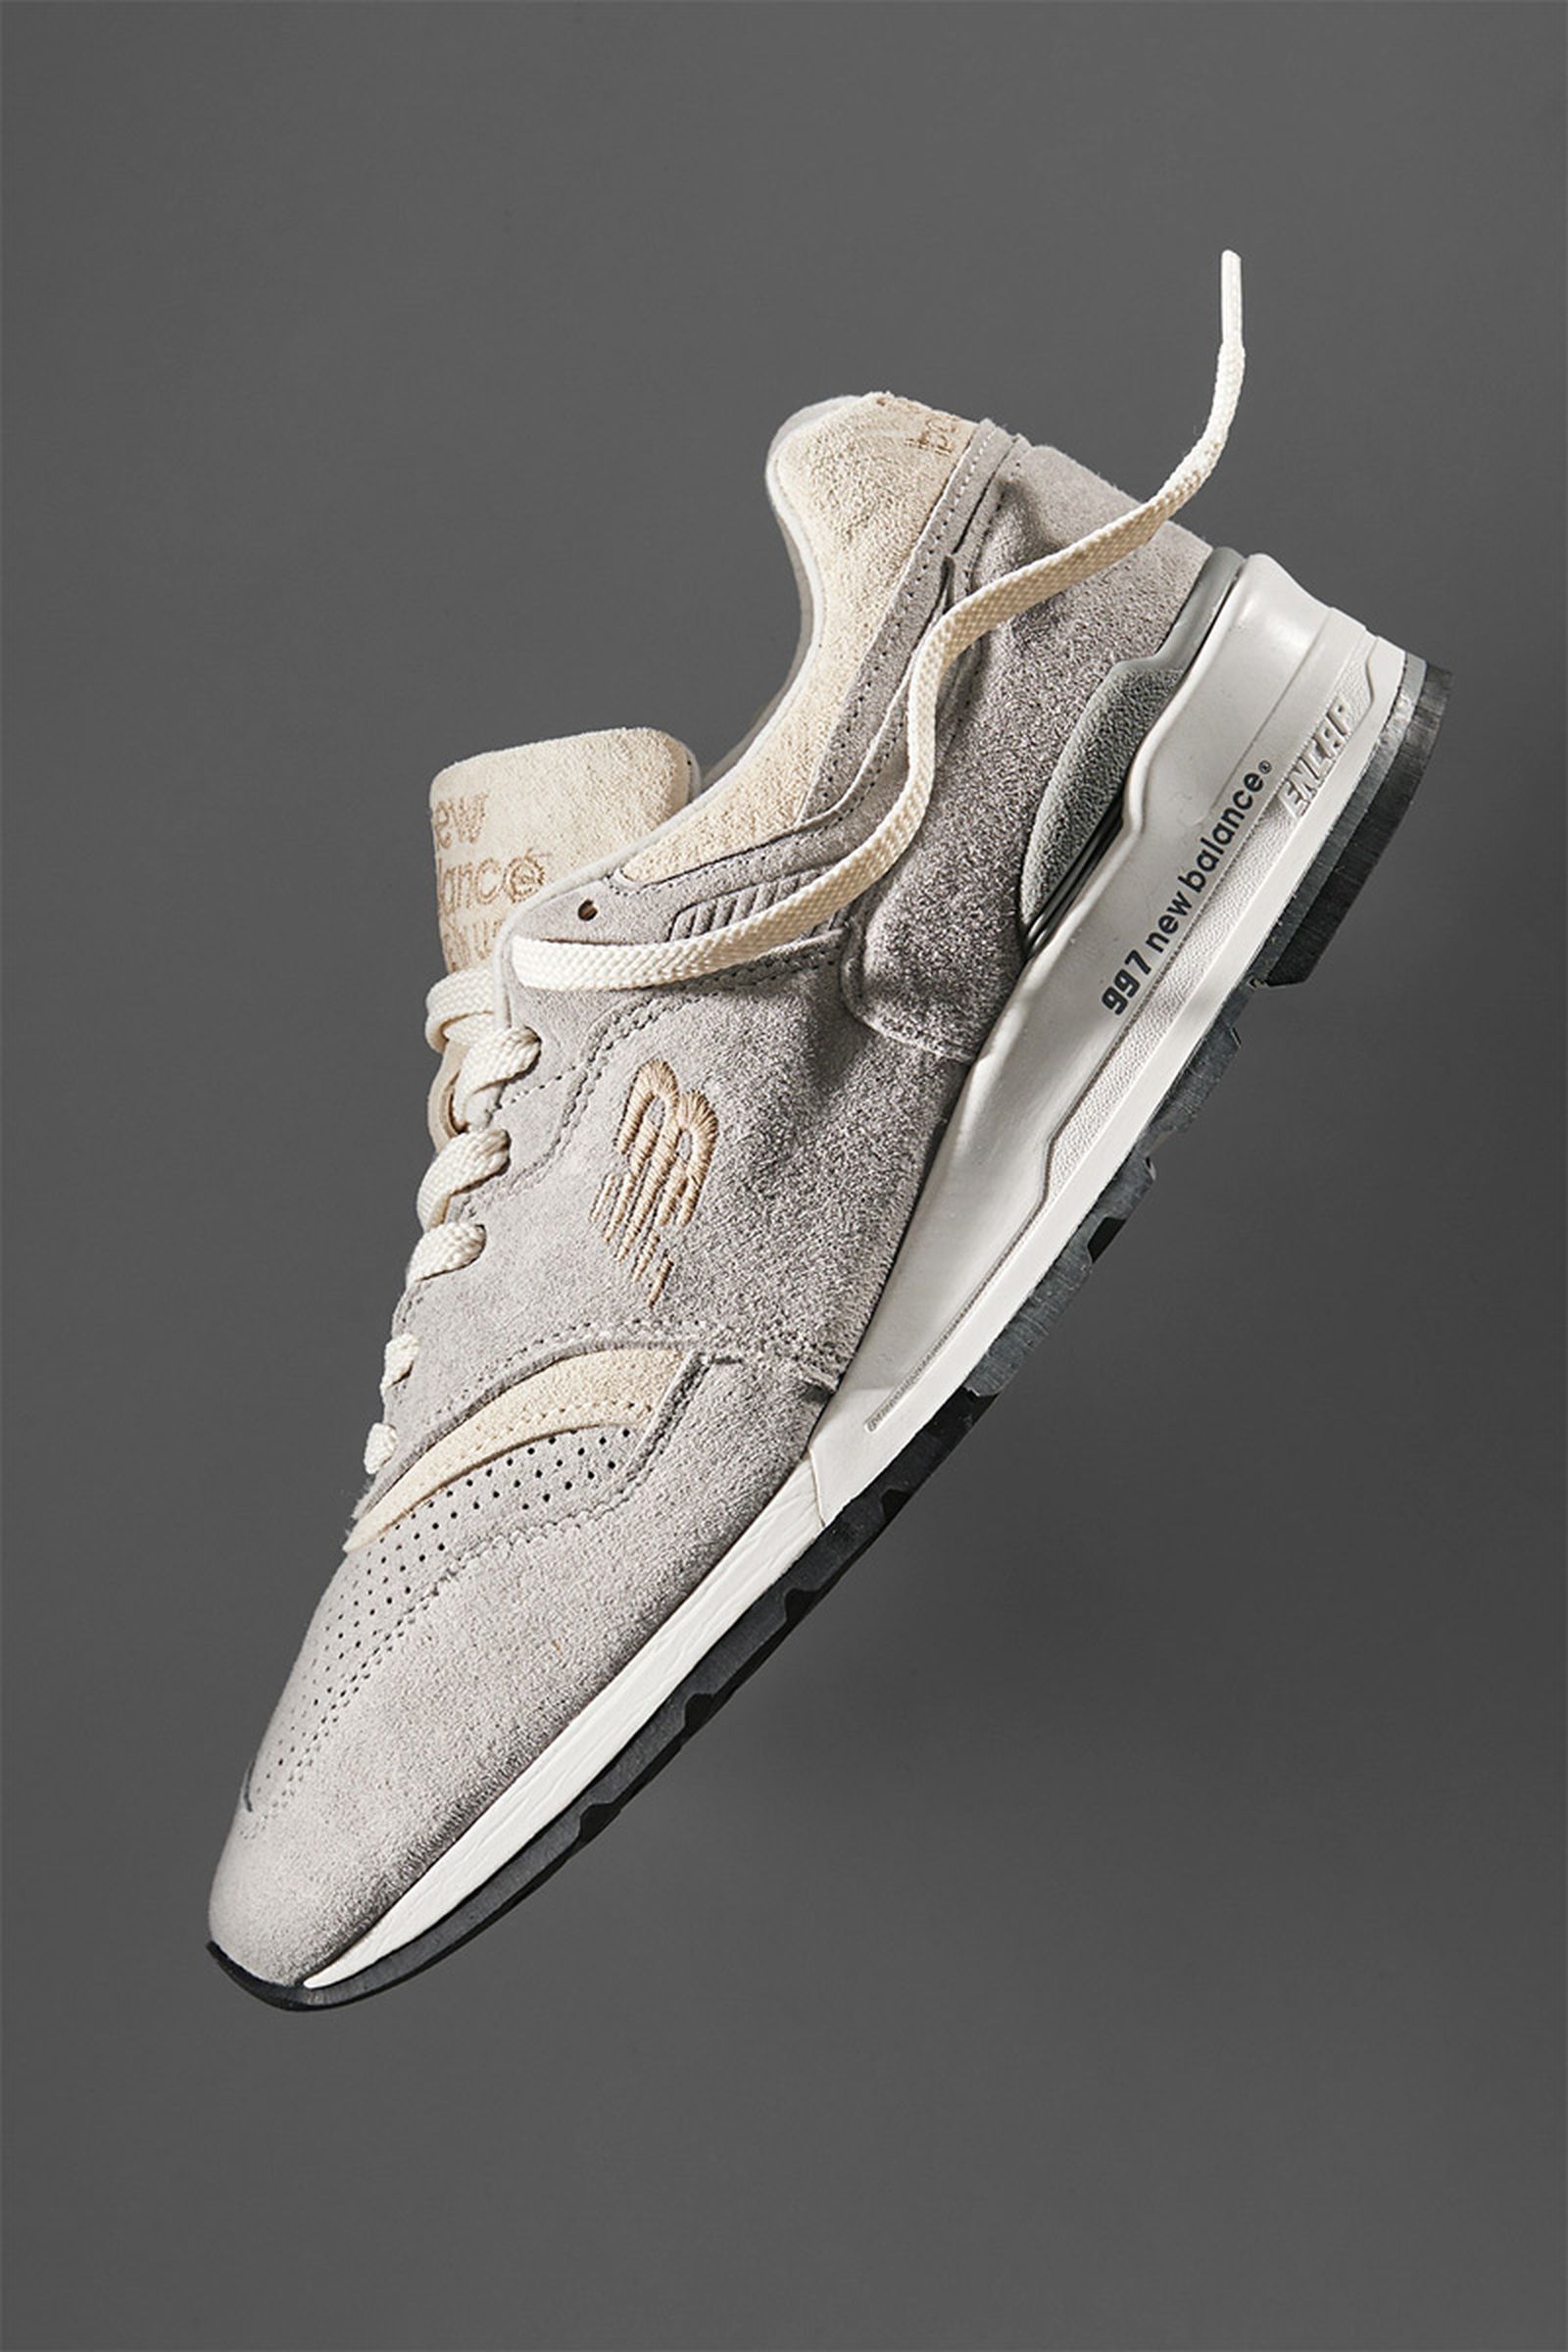 todd-snyder-new-balance-triborough-997-release-date-price-05